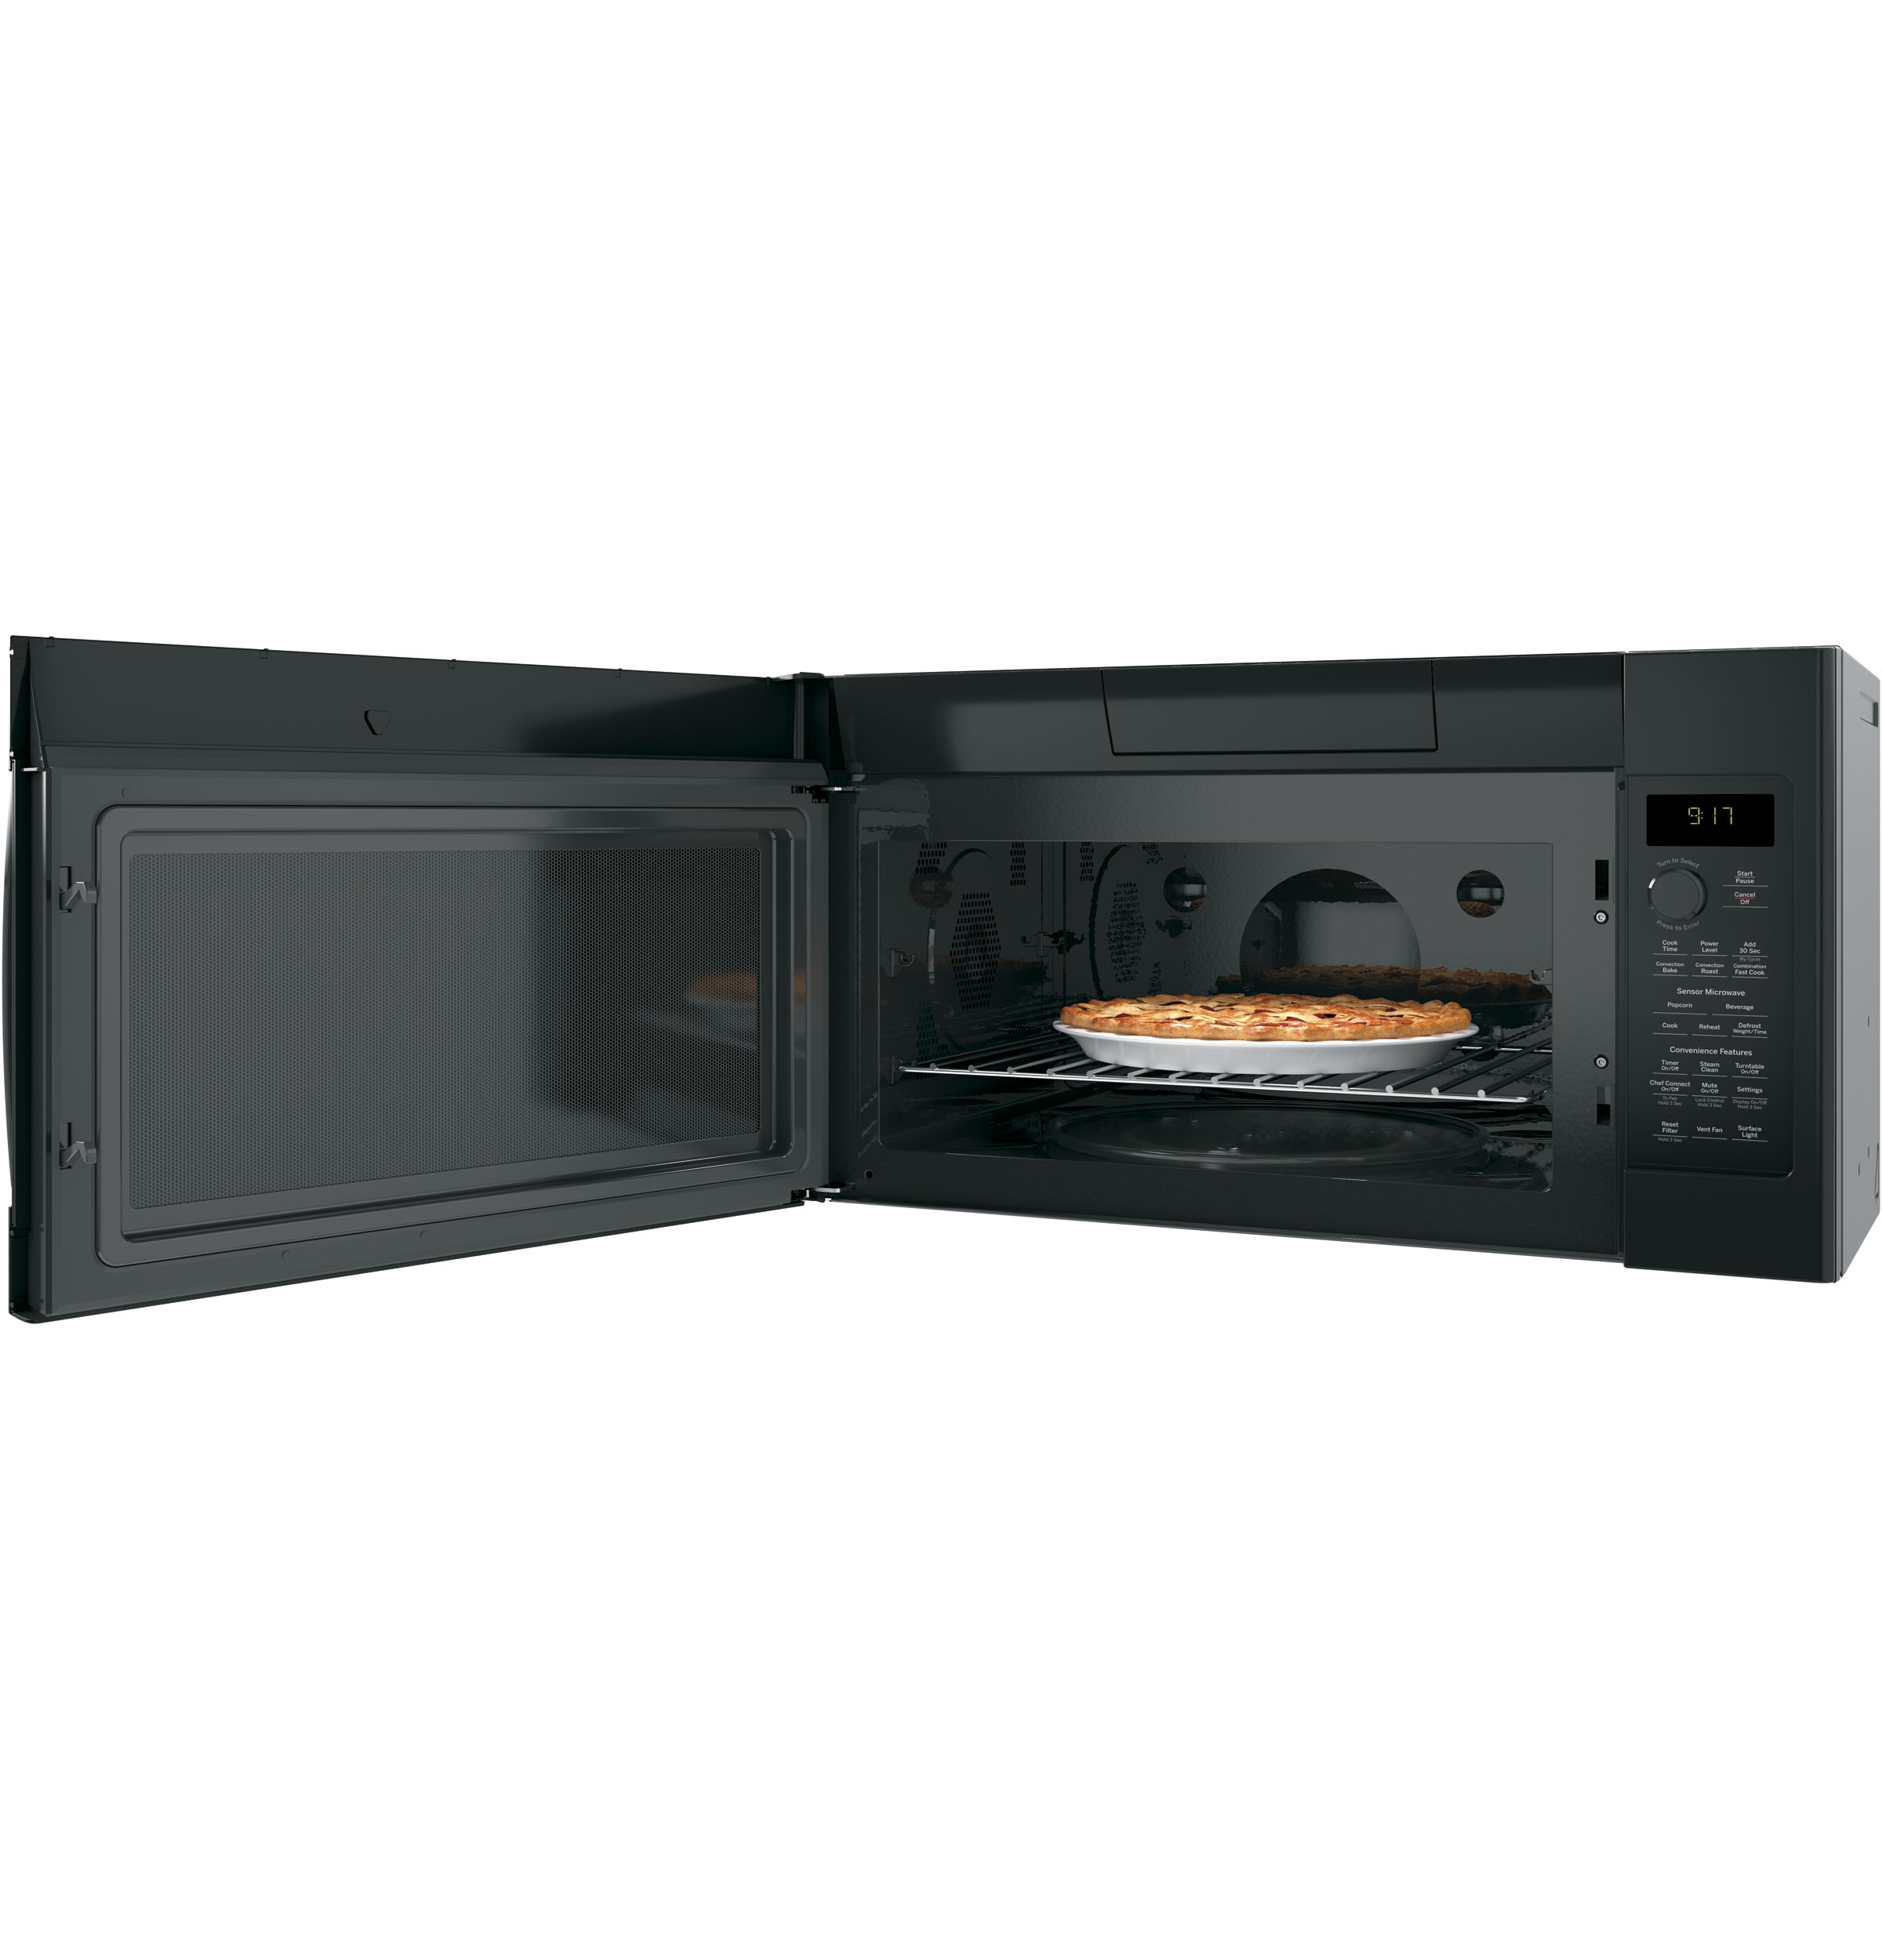 Model: PVM9179DRBB | GE Profile GE Profile™ 1.7 Cu. Ft. Convection Over-the-Range Microwave Oven